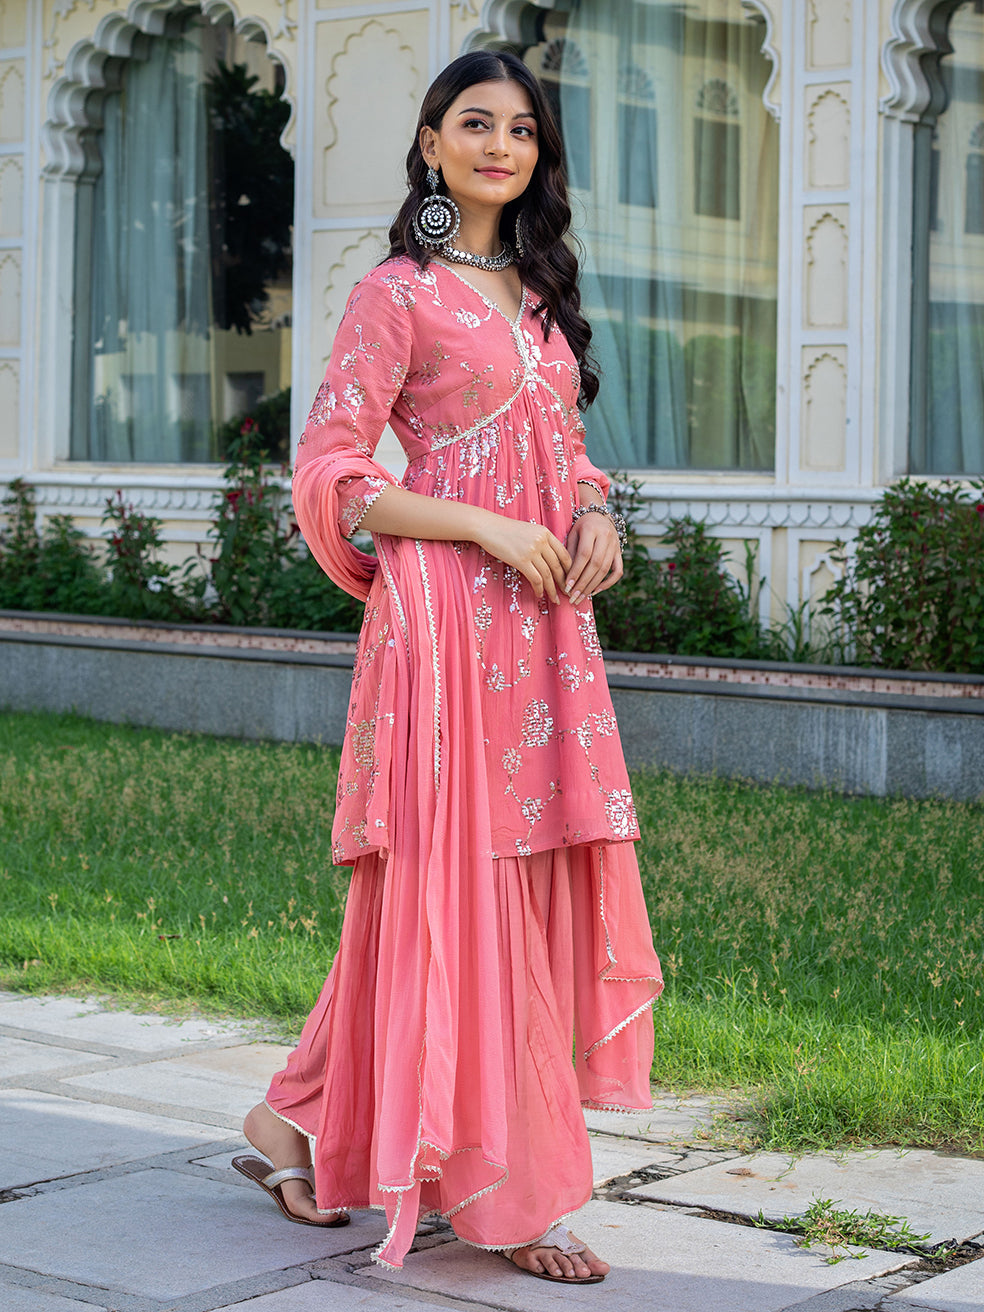 radiate-beauty-in-our-pastel-pink-sharara-set-featuring-a-kurta-with-a-sequin-jaal-embroidery-effortless-style-and-elegance-for-a-chic-look